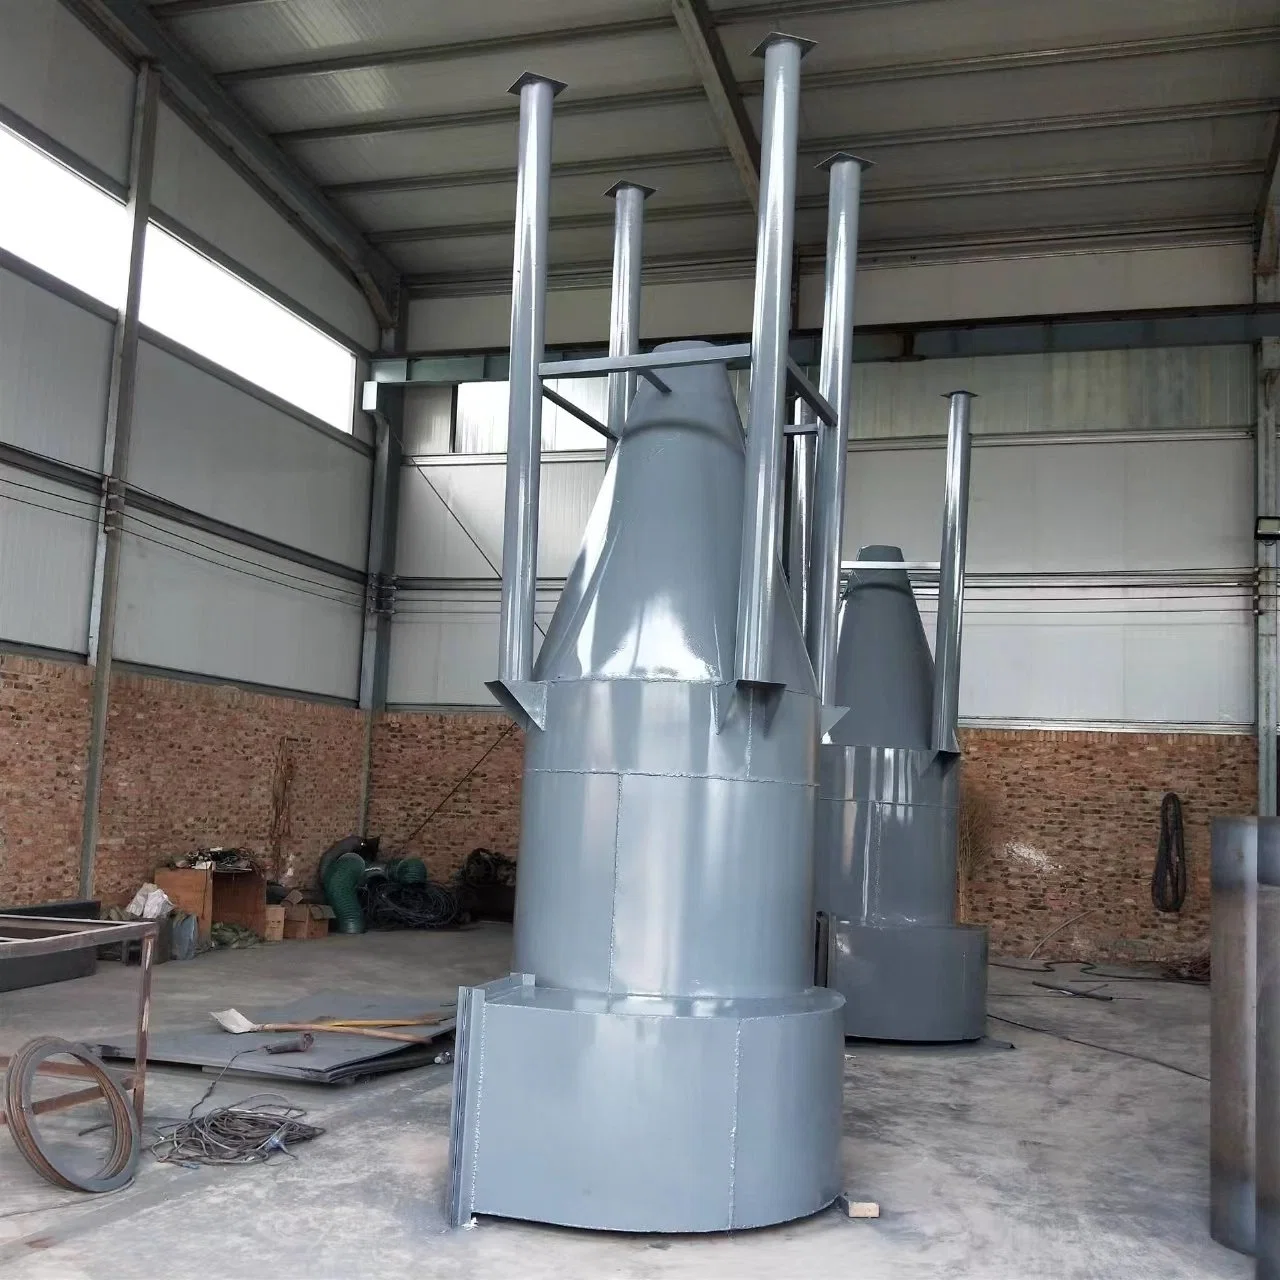 High Efficiency Cyclone Dust Filter for Large Particle Size Air